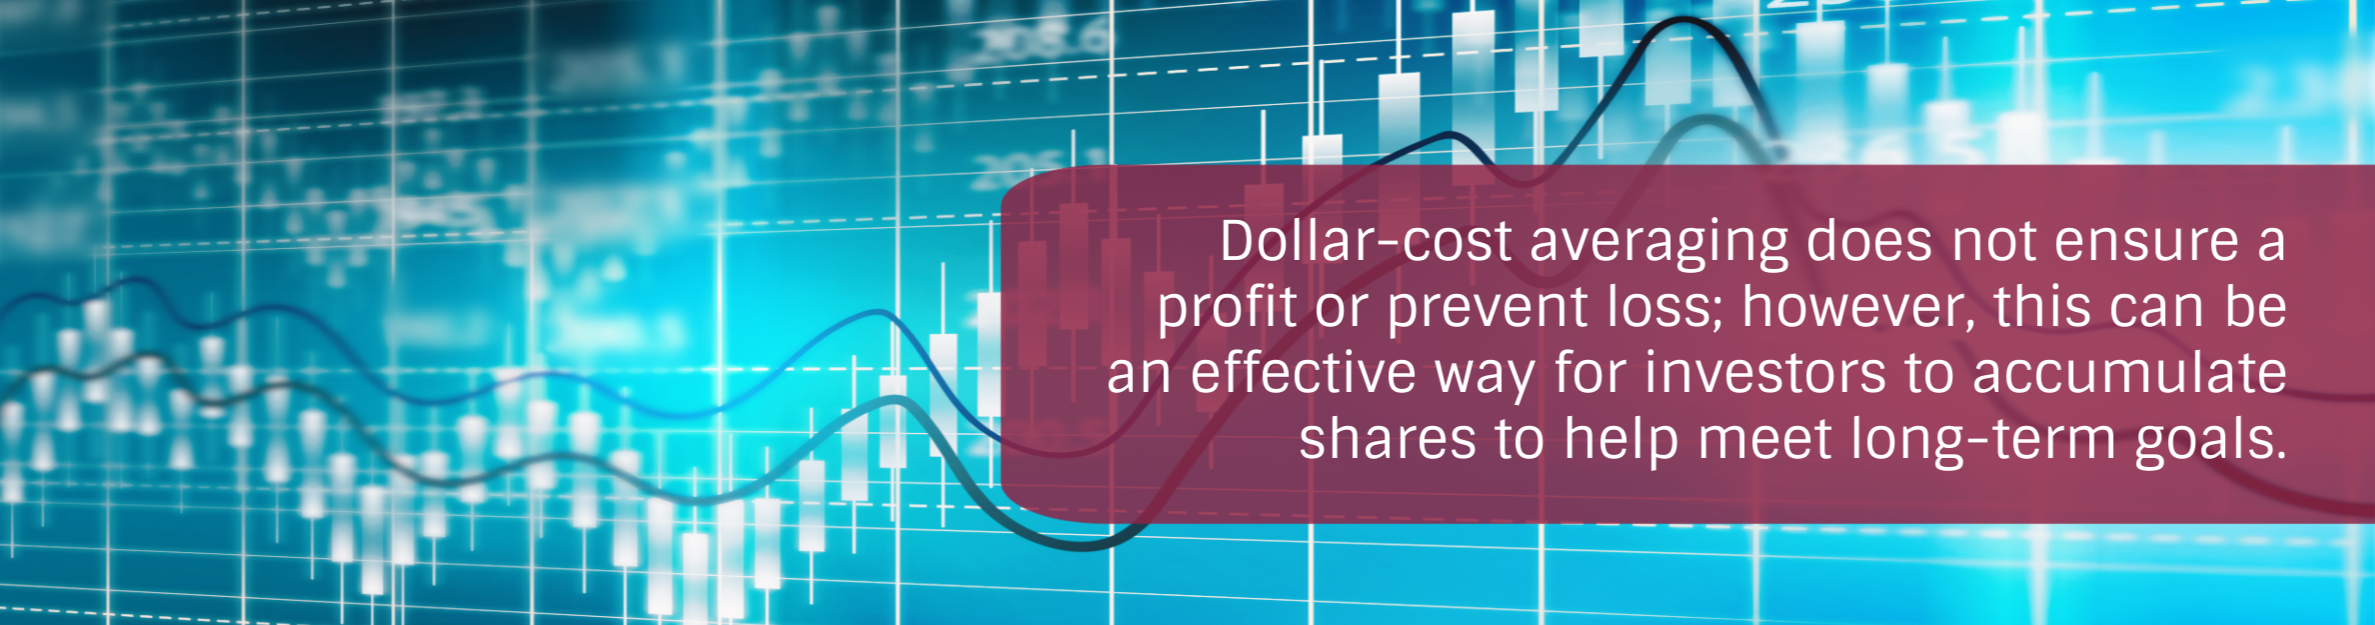 Photo: Stock Market Background
Text: Dollar-cost averaging does not ensure a profit or prevent loss; however, this can be an effective way for investors to accumulate shares to help meet long-term goals.